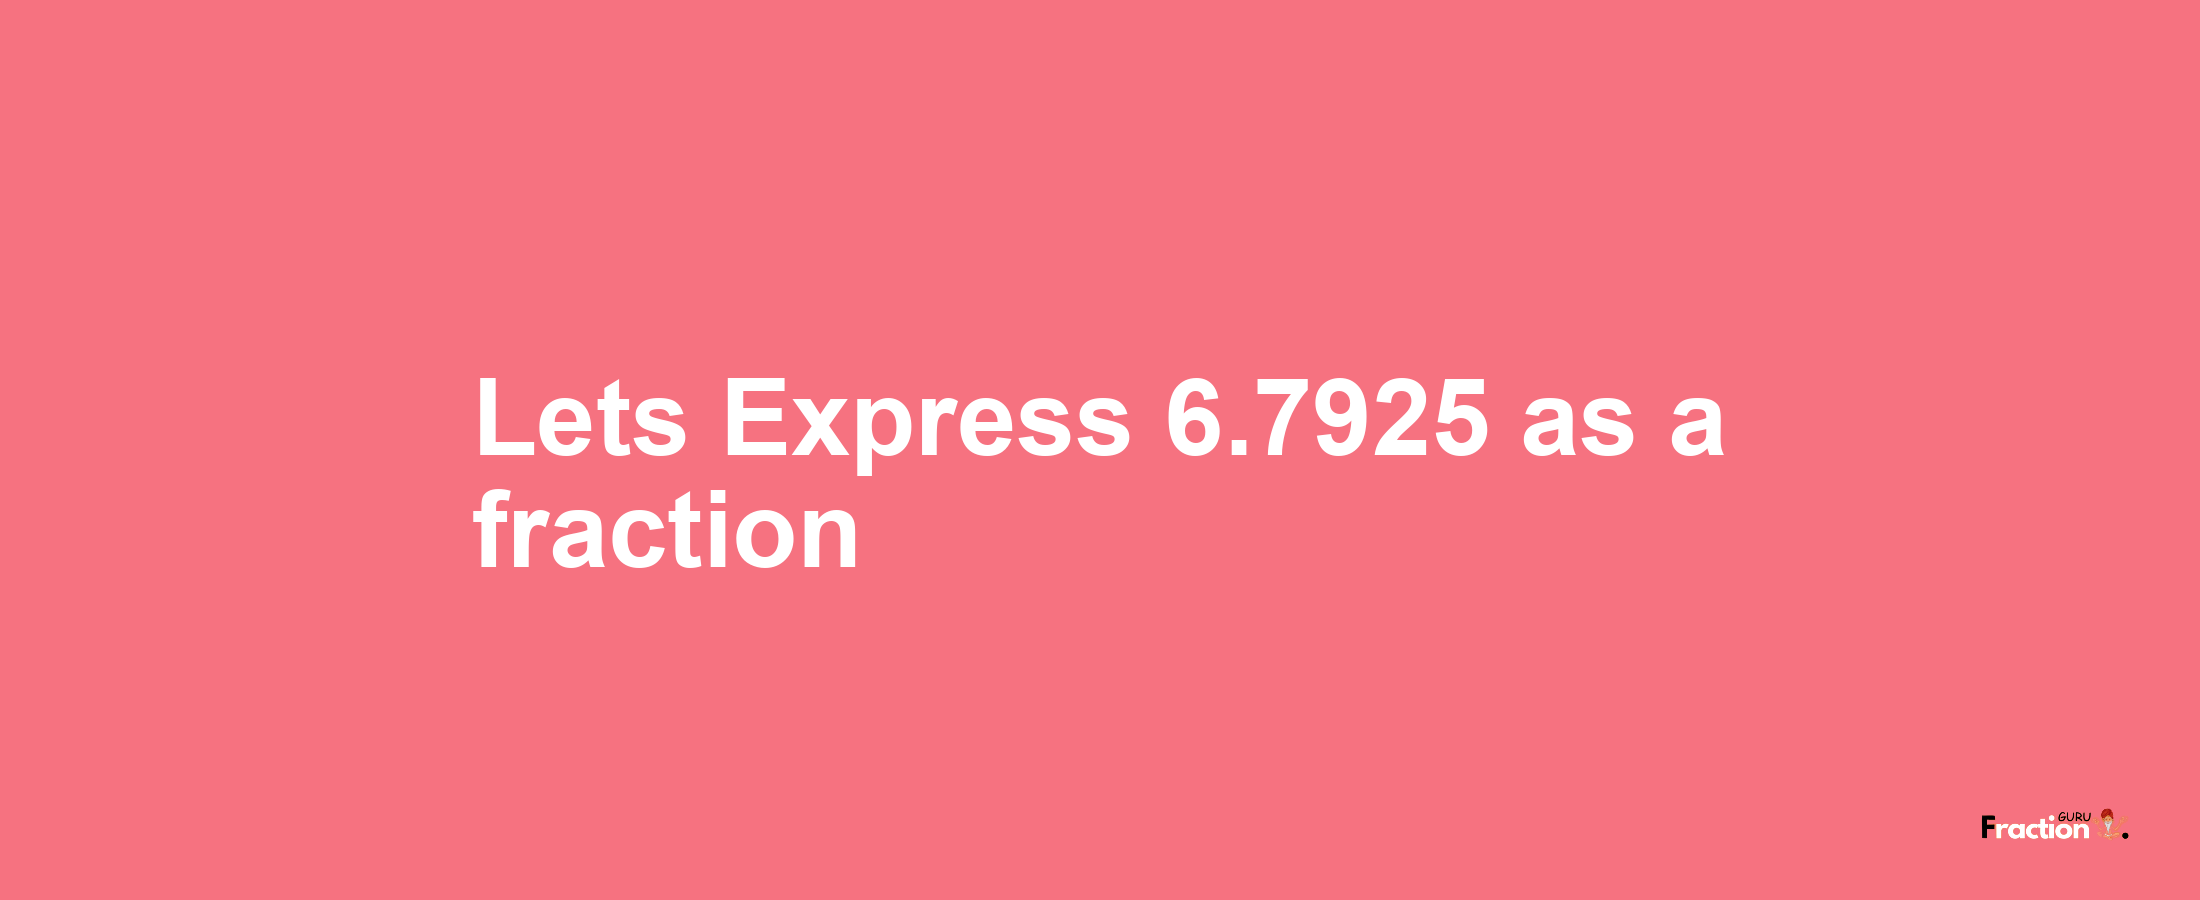 Lets Express 6.7925 as afraction